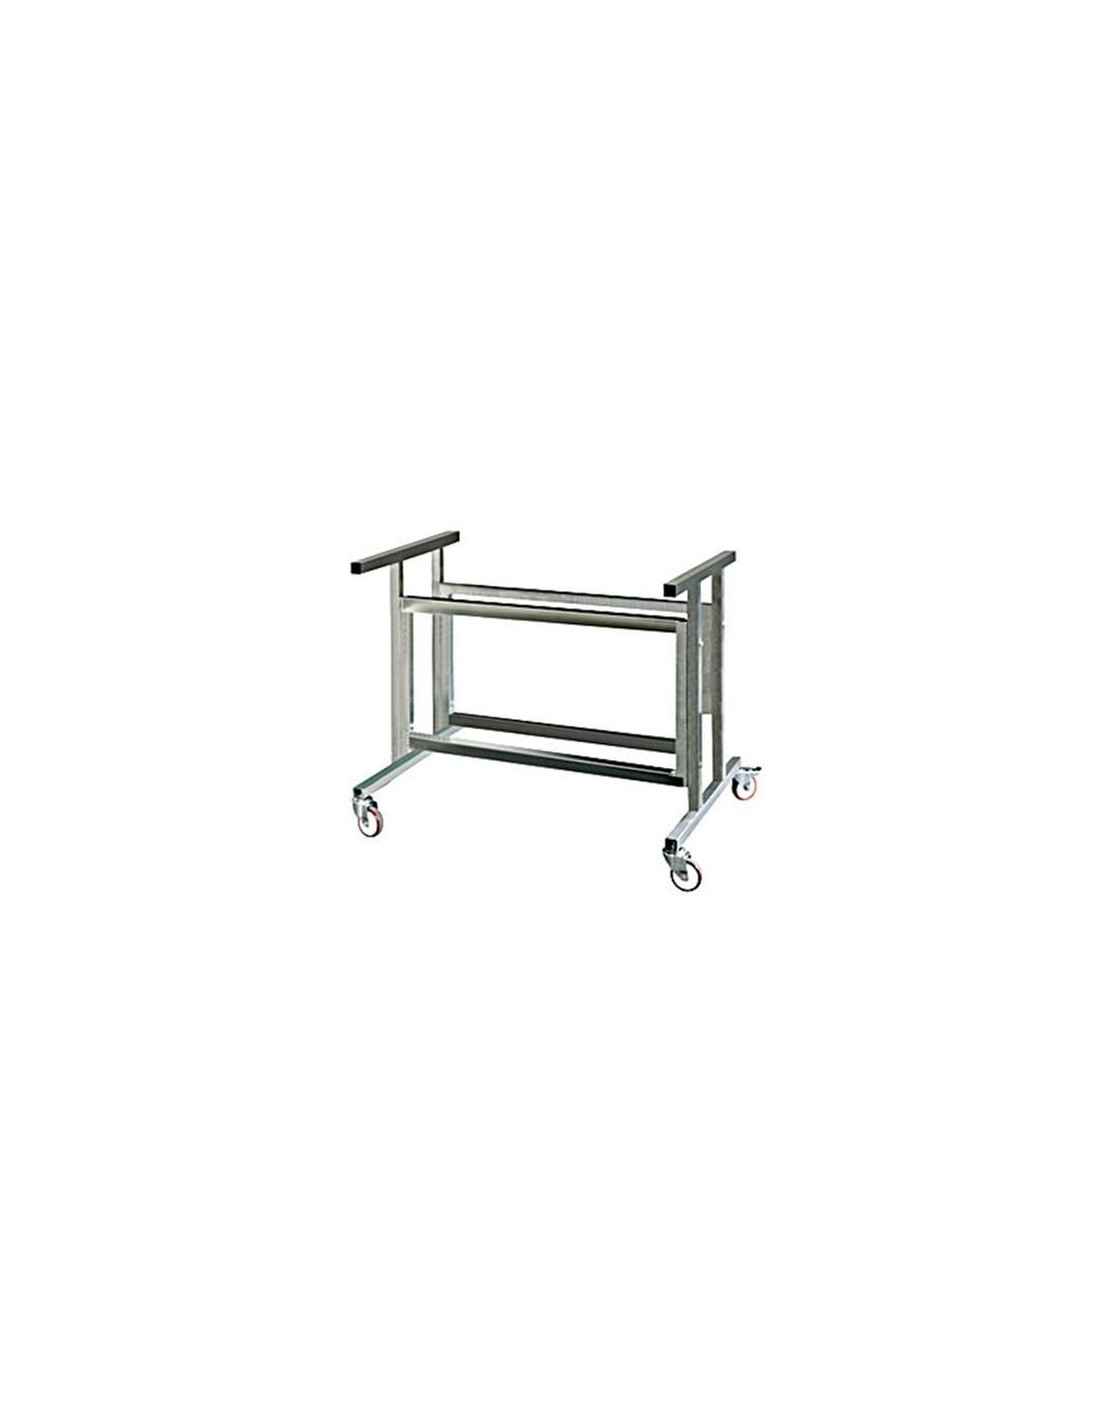 Stainless steel trolley with wheels (removable) with shelf for recovery container fat - To Mod. ELBA